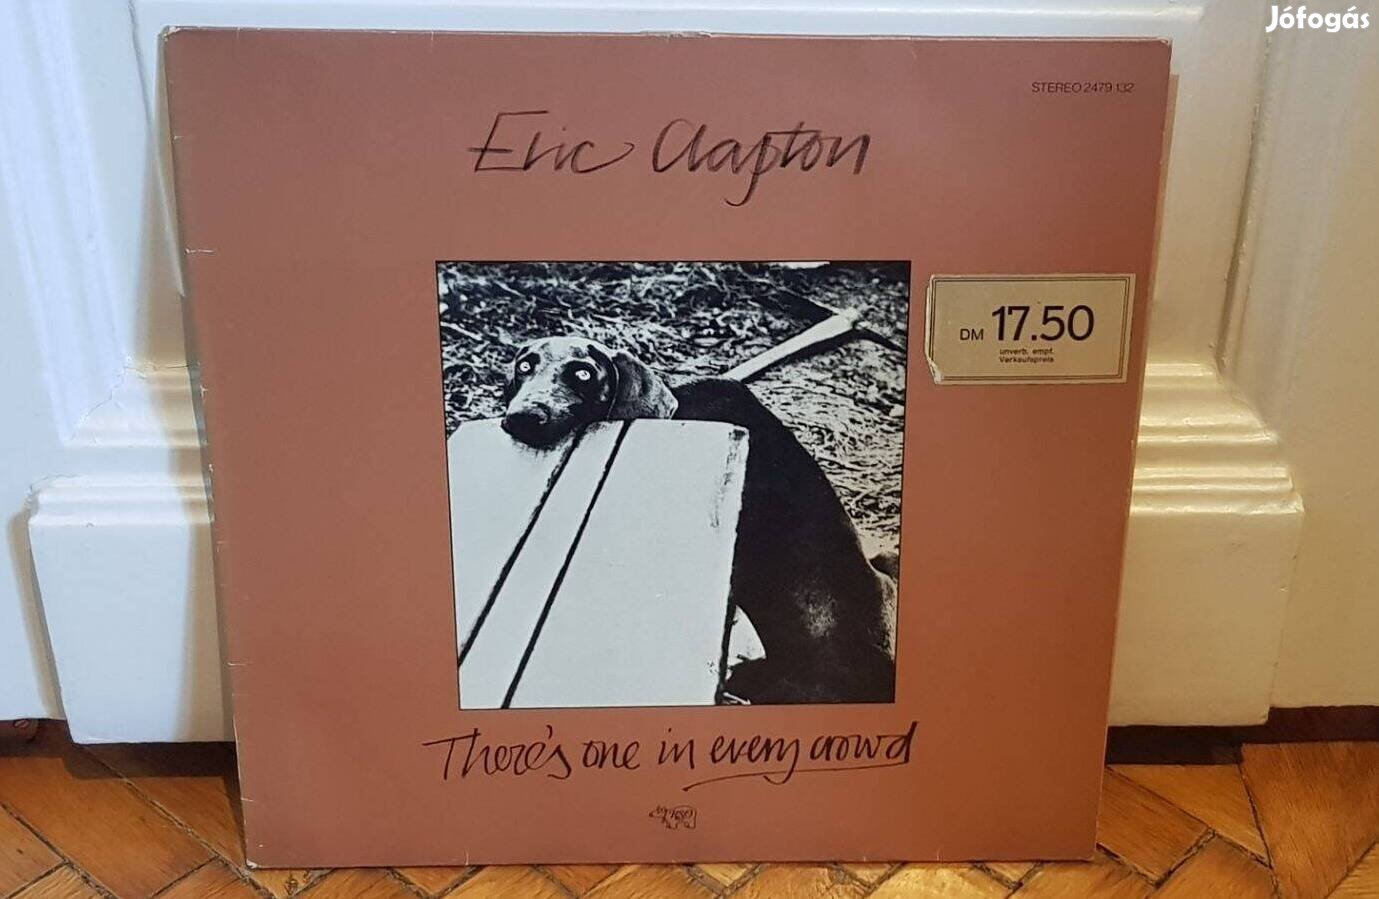 Eric Clapton - There's One In Every Crowd LP 1975 Germany